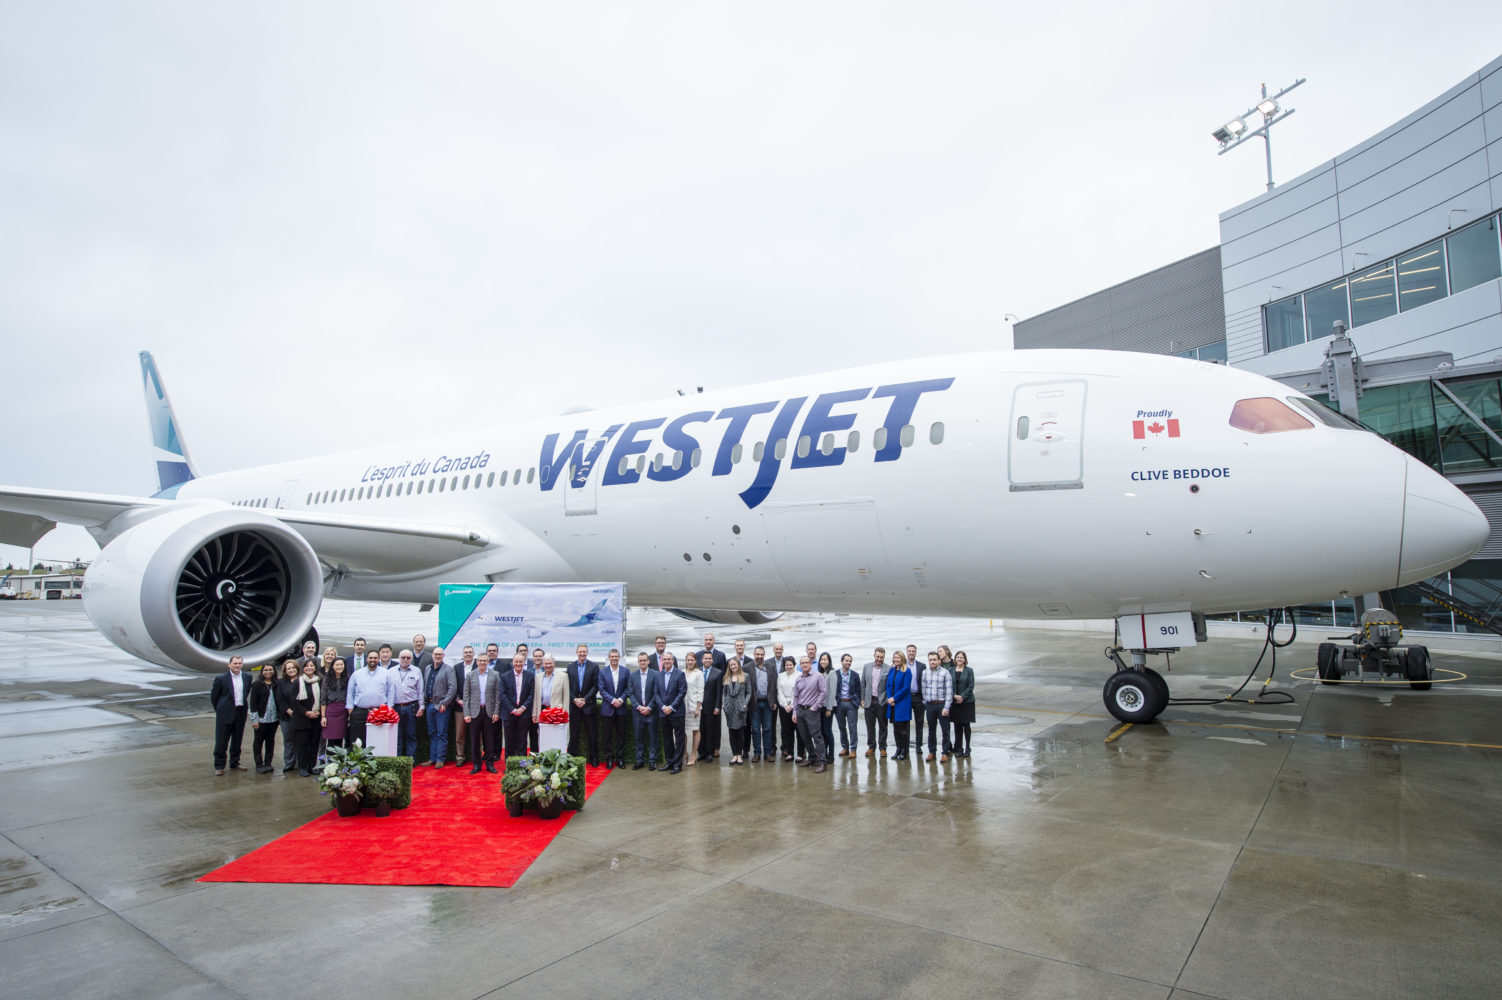 WestJet takes delivery of their first Boeing 787 Dreamliner